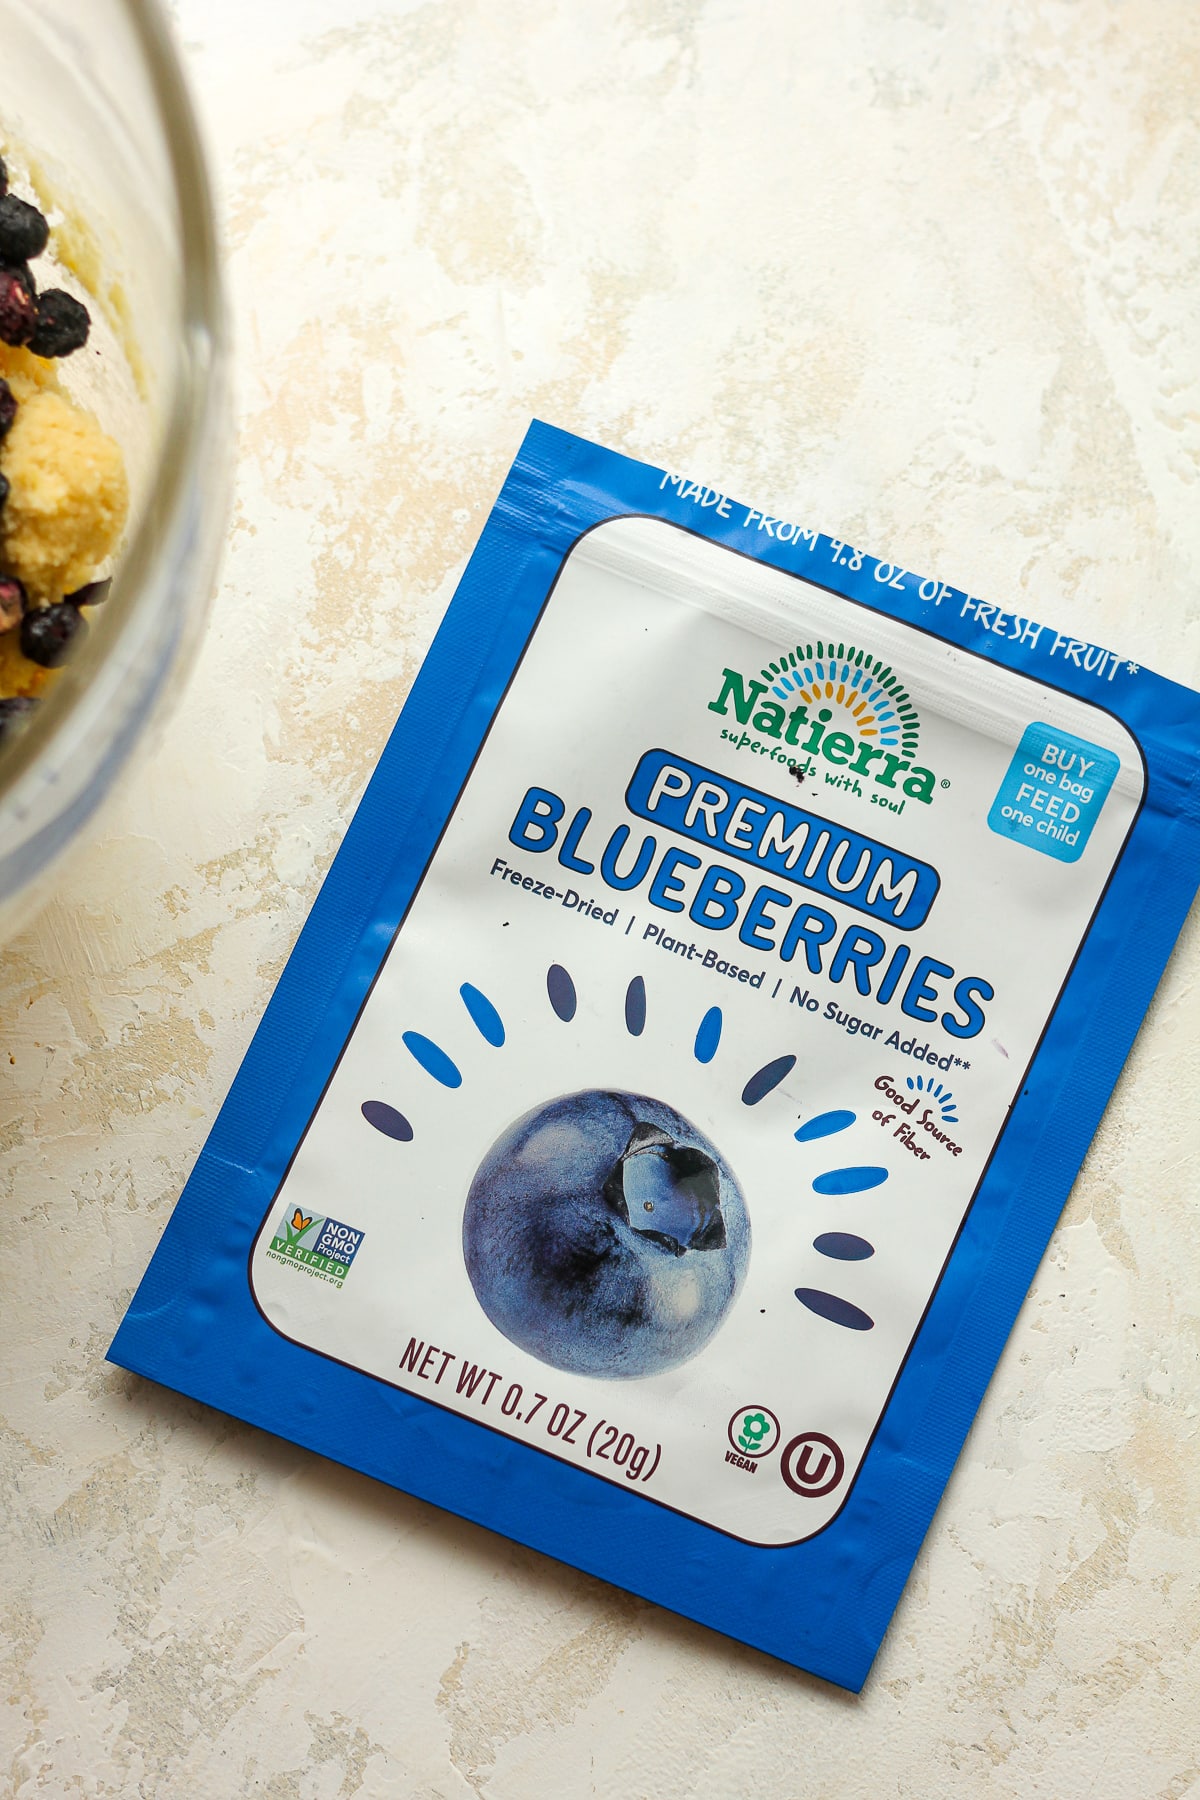 A package of freeze-dried blueberries.